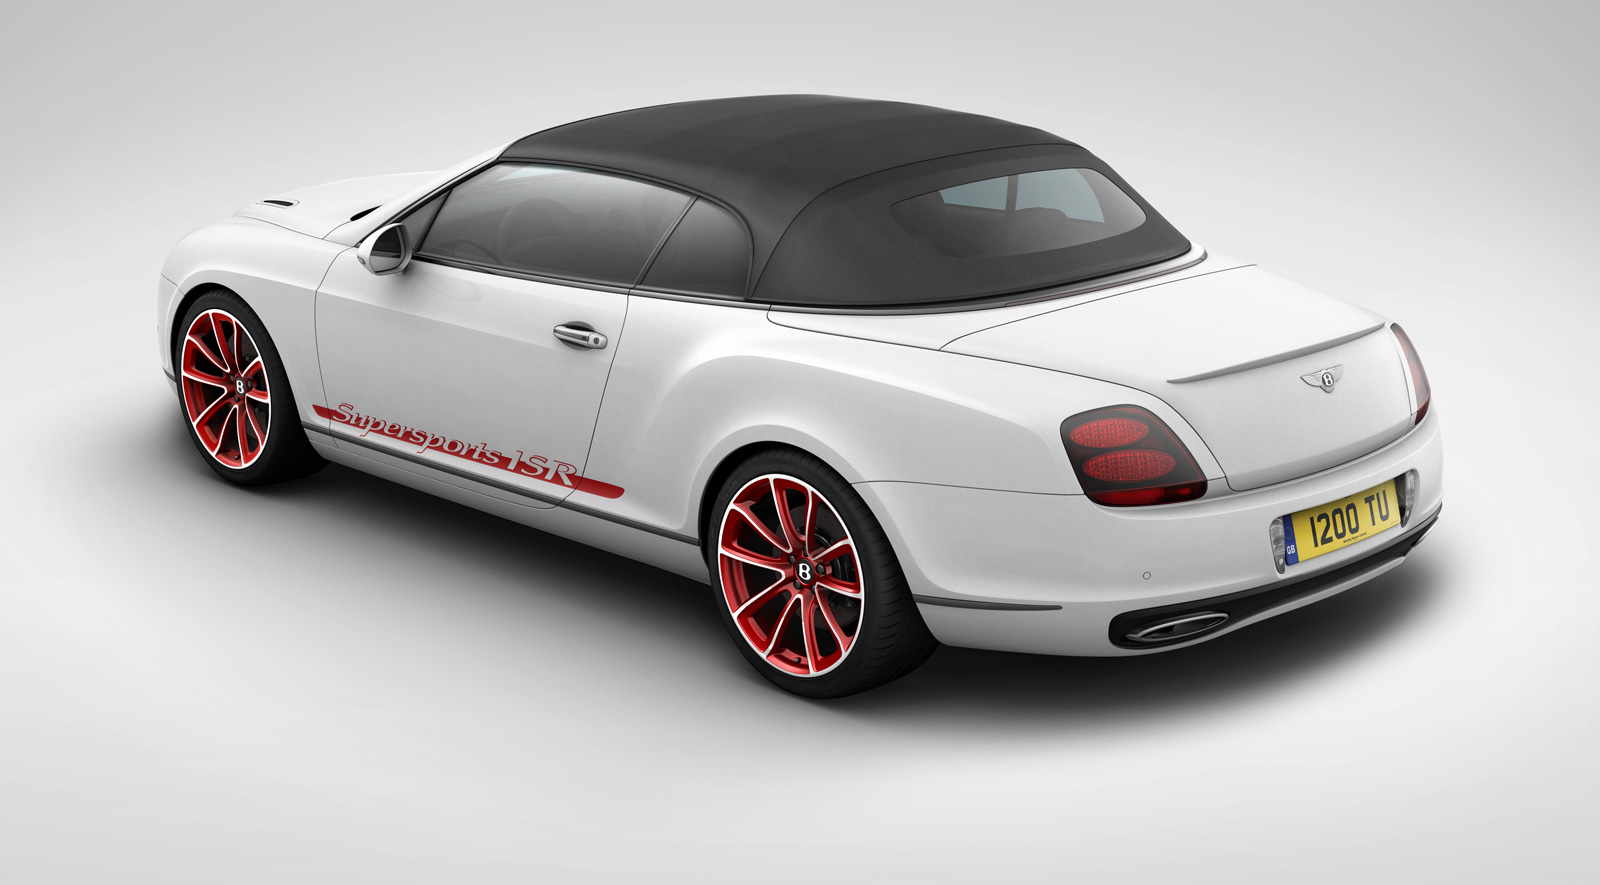 Bentley Continental Supersports Convertible ISR (Ice Speed Record)